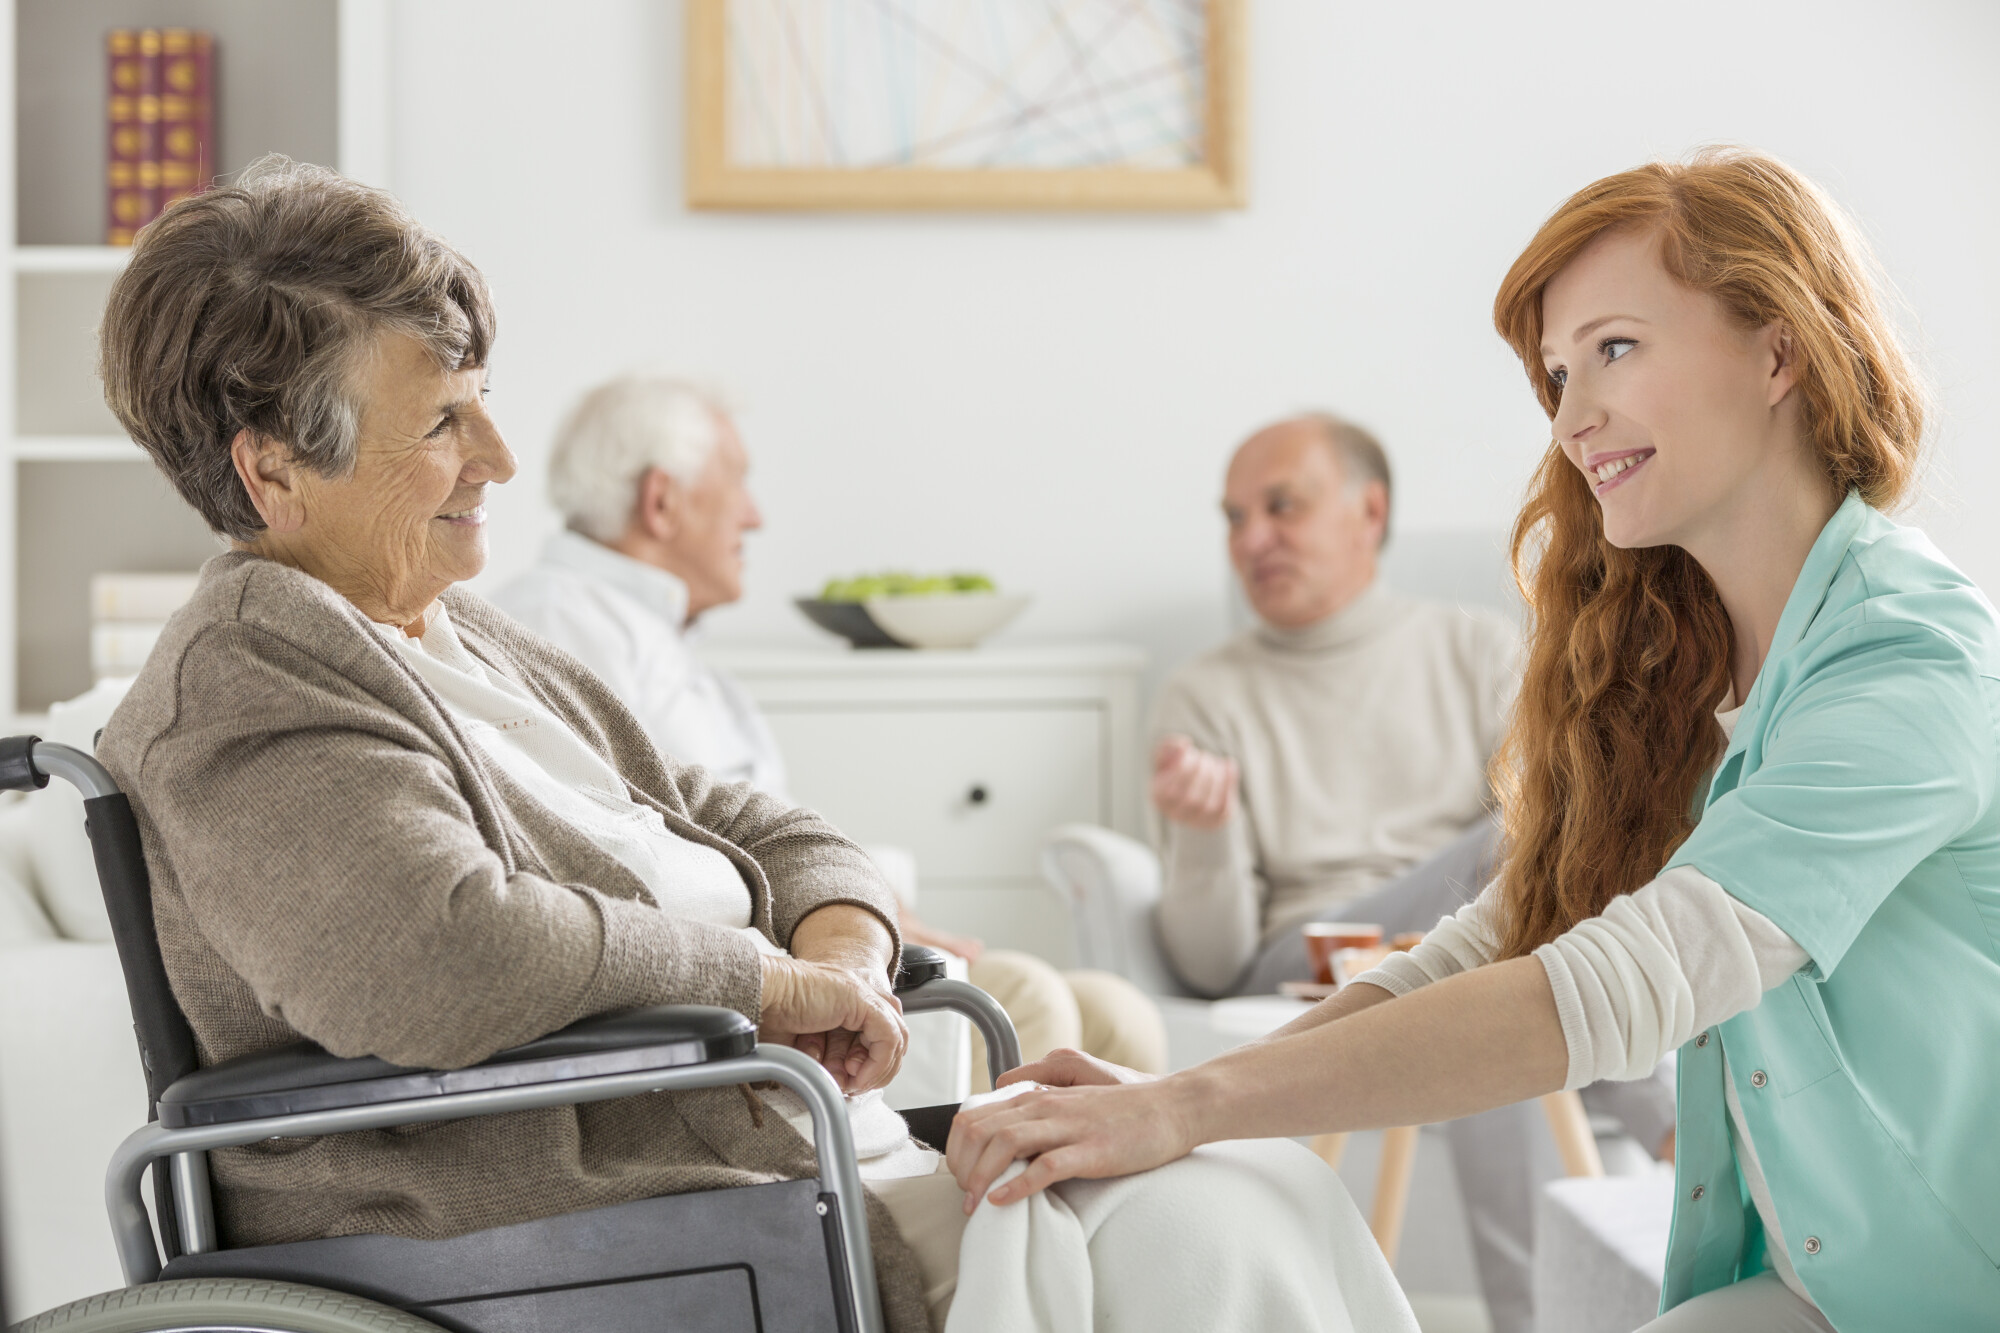 Senior Services to Consider as You (or a Loved One) Ages